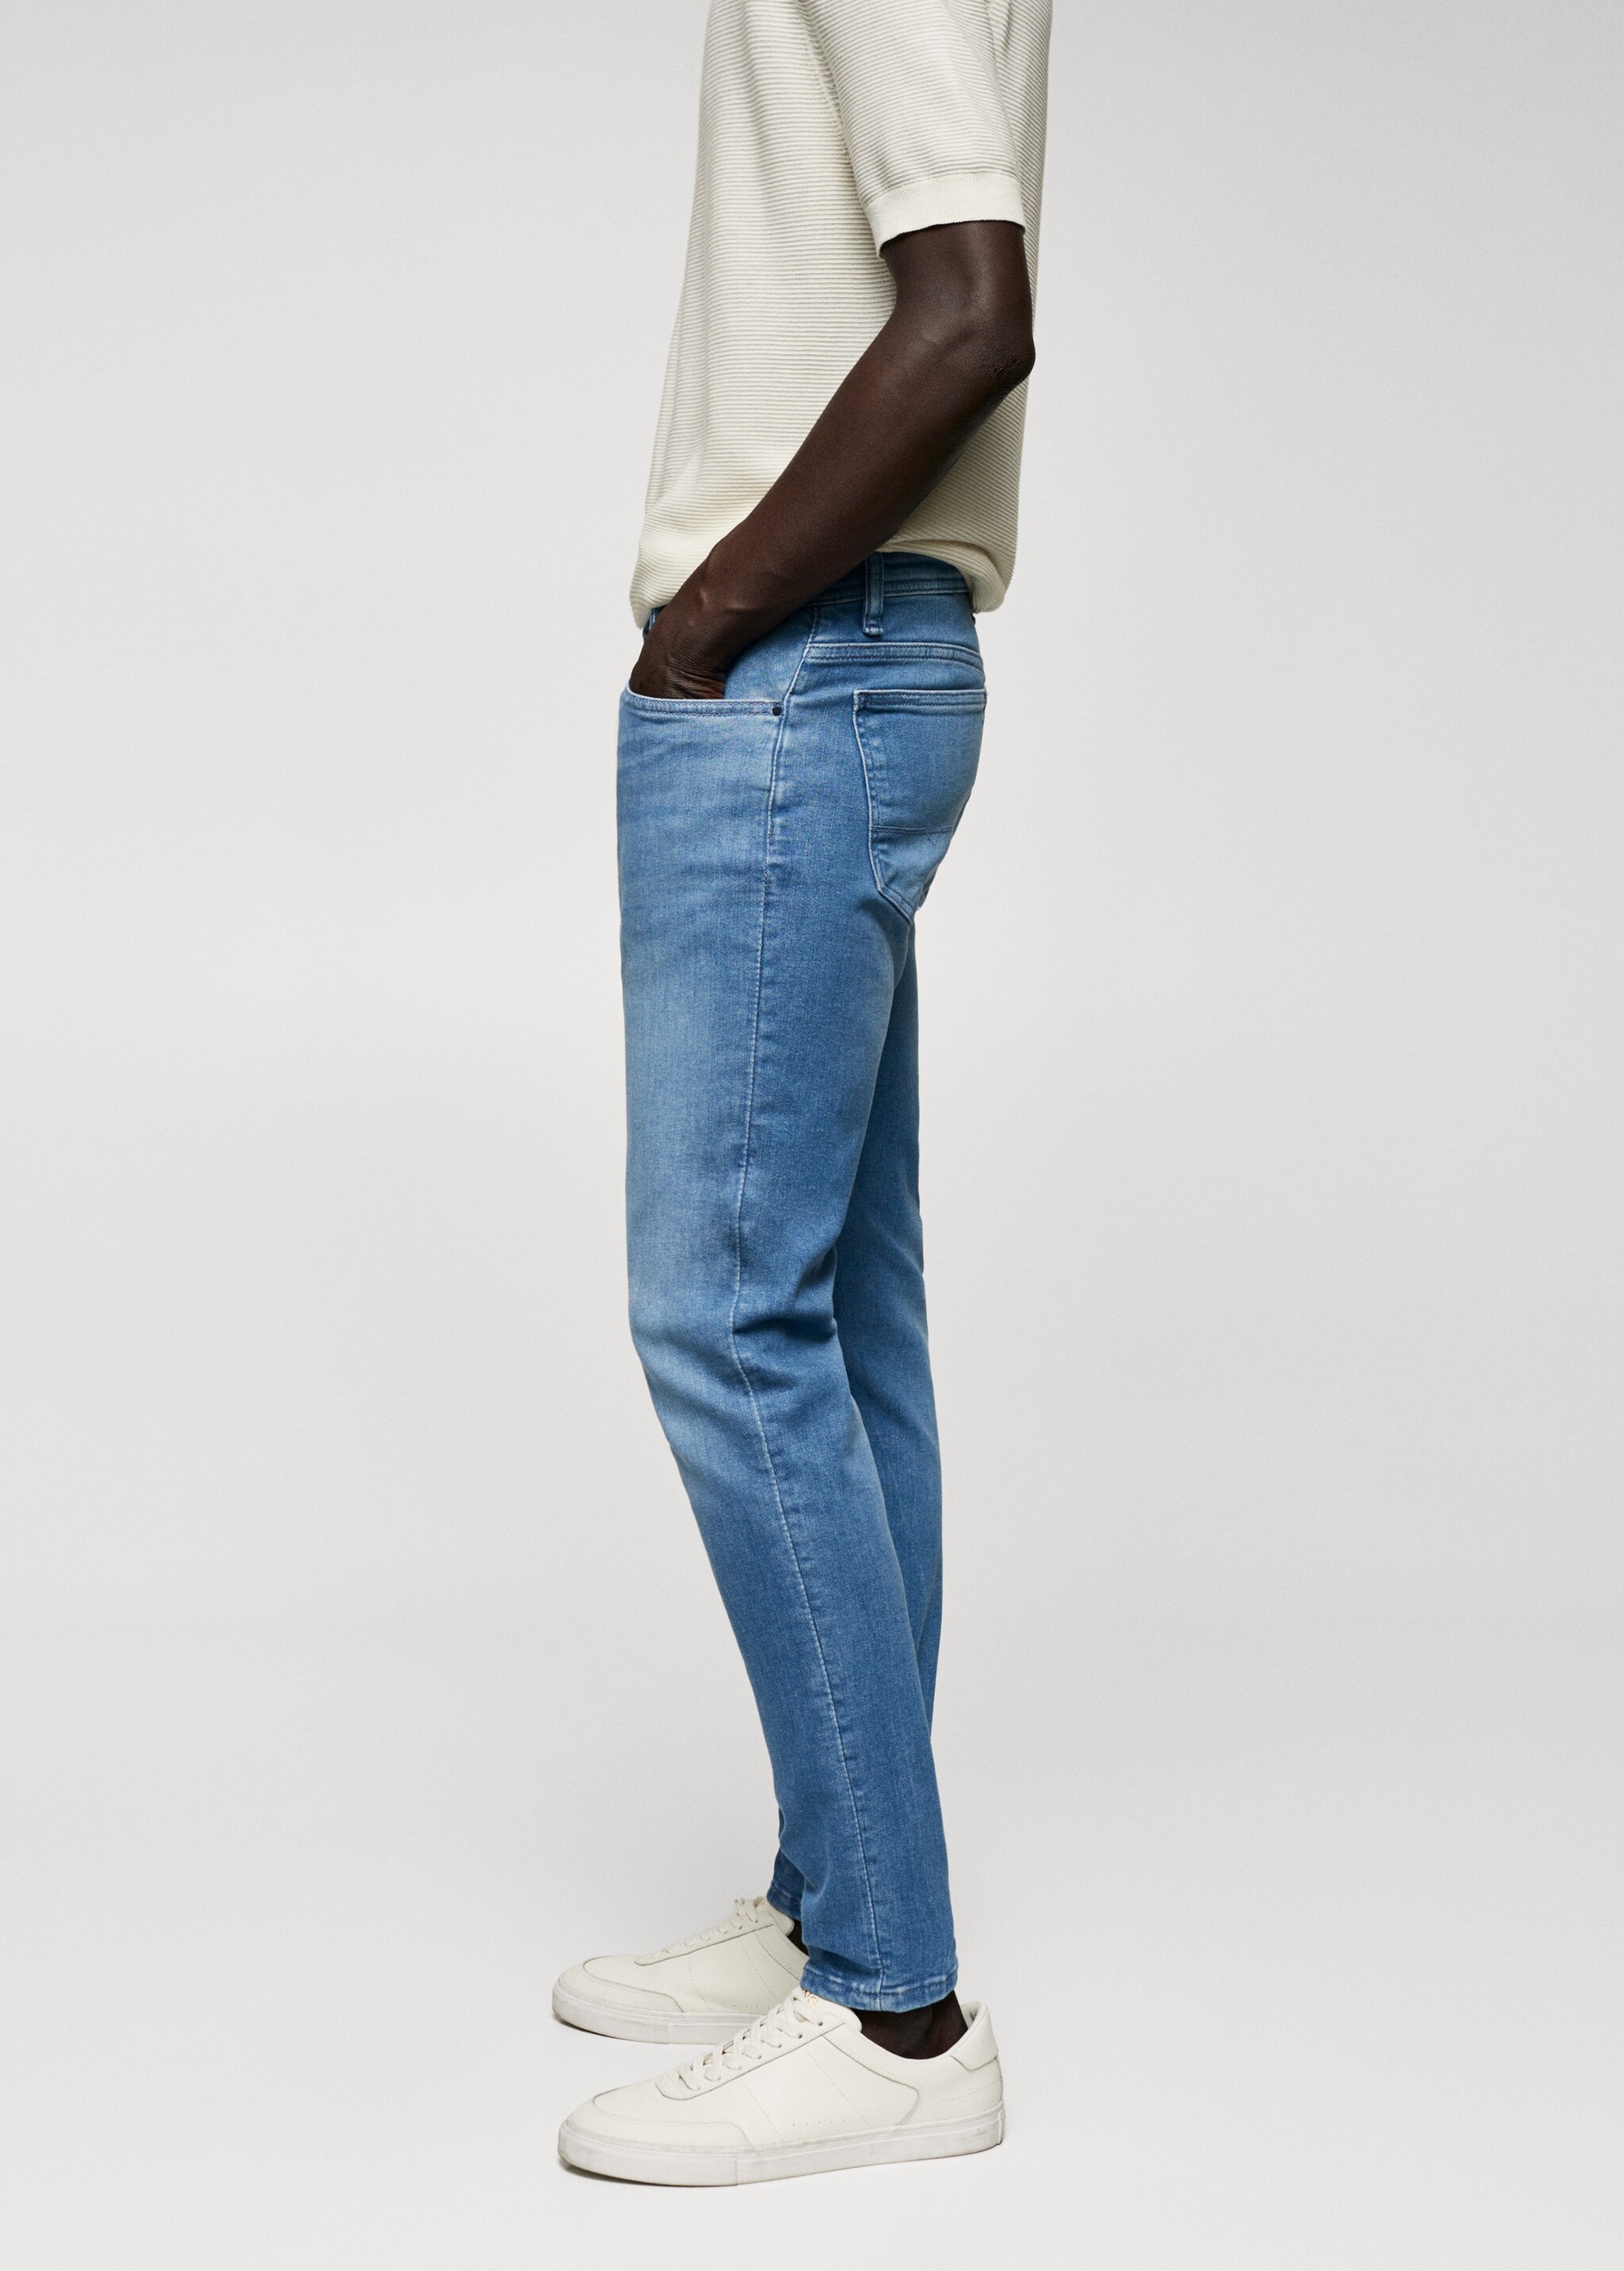 Premium skinny jeans - Details of the article 2